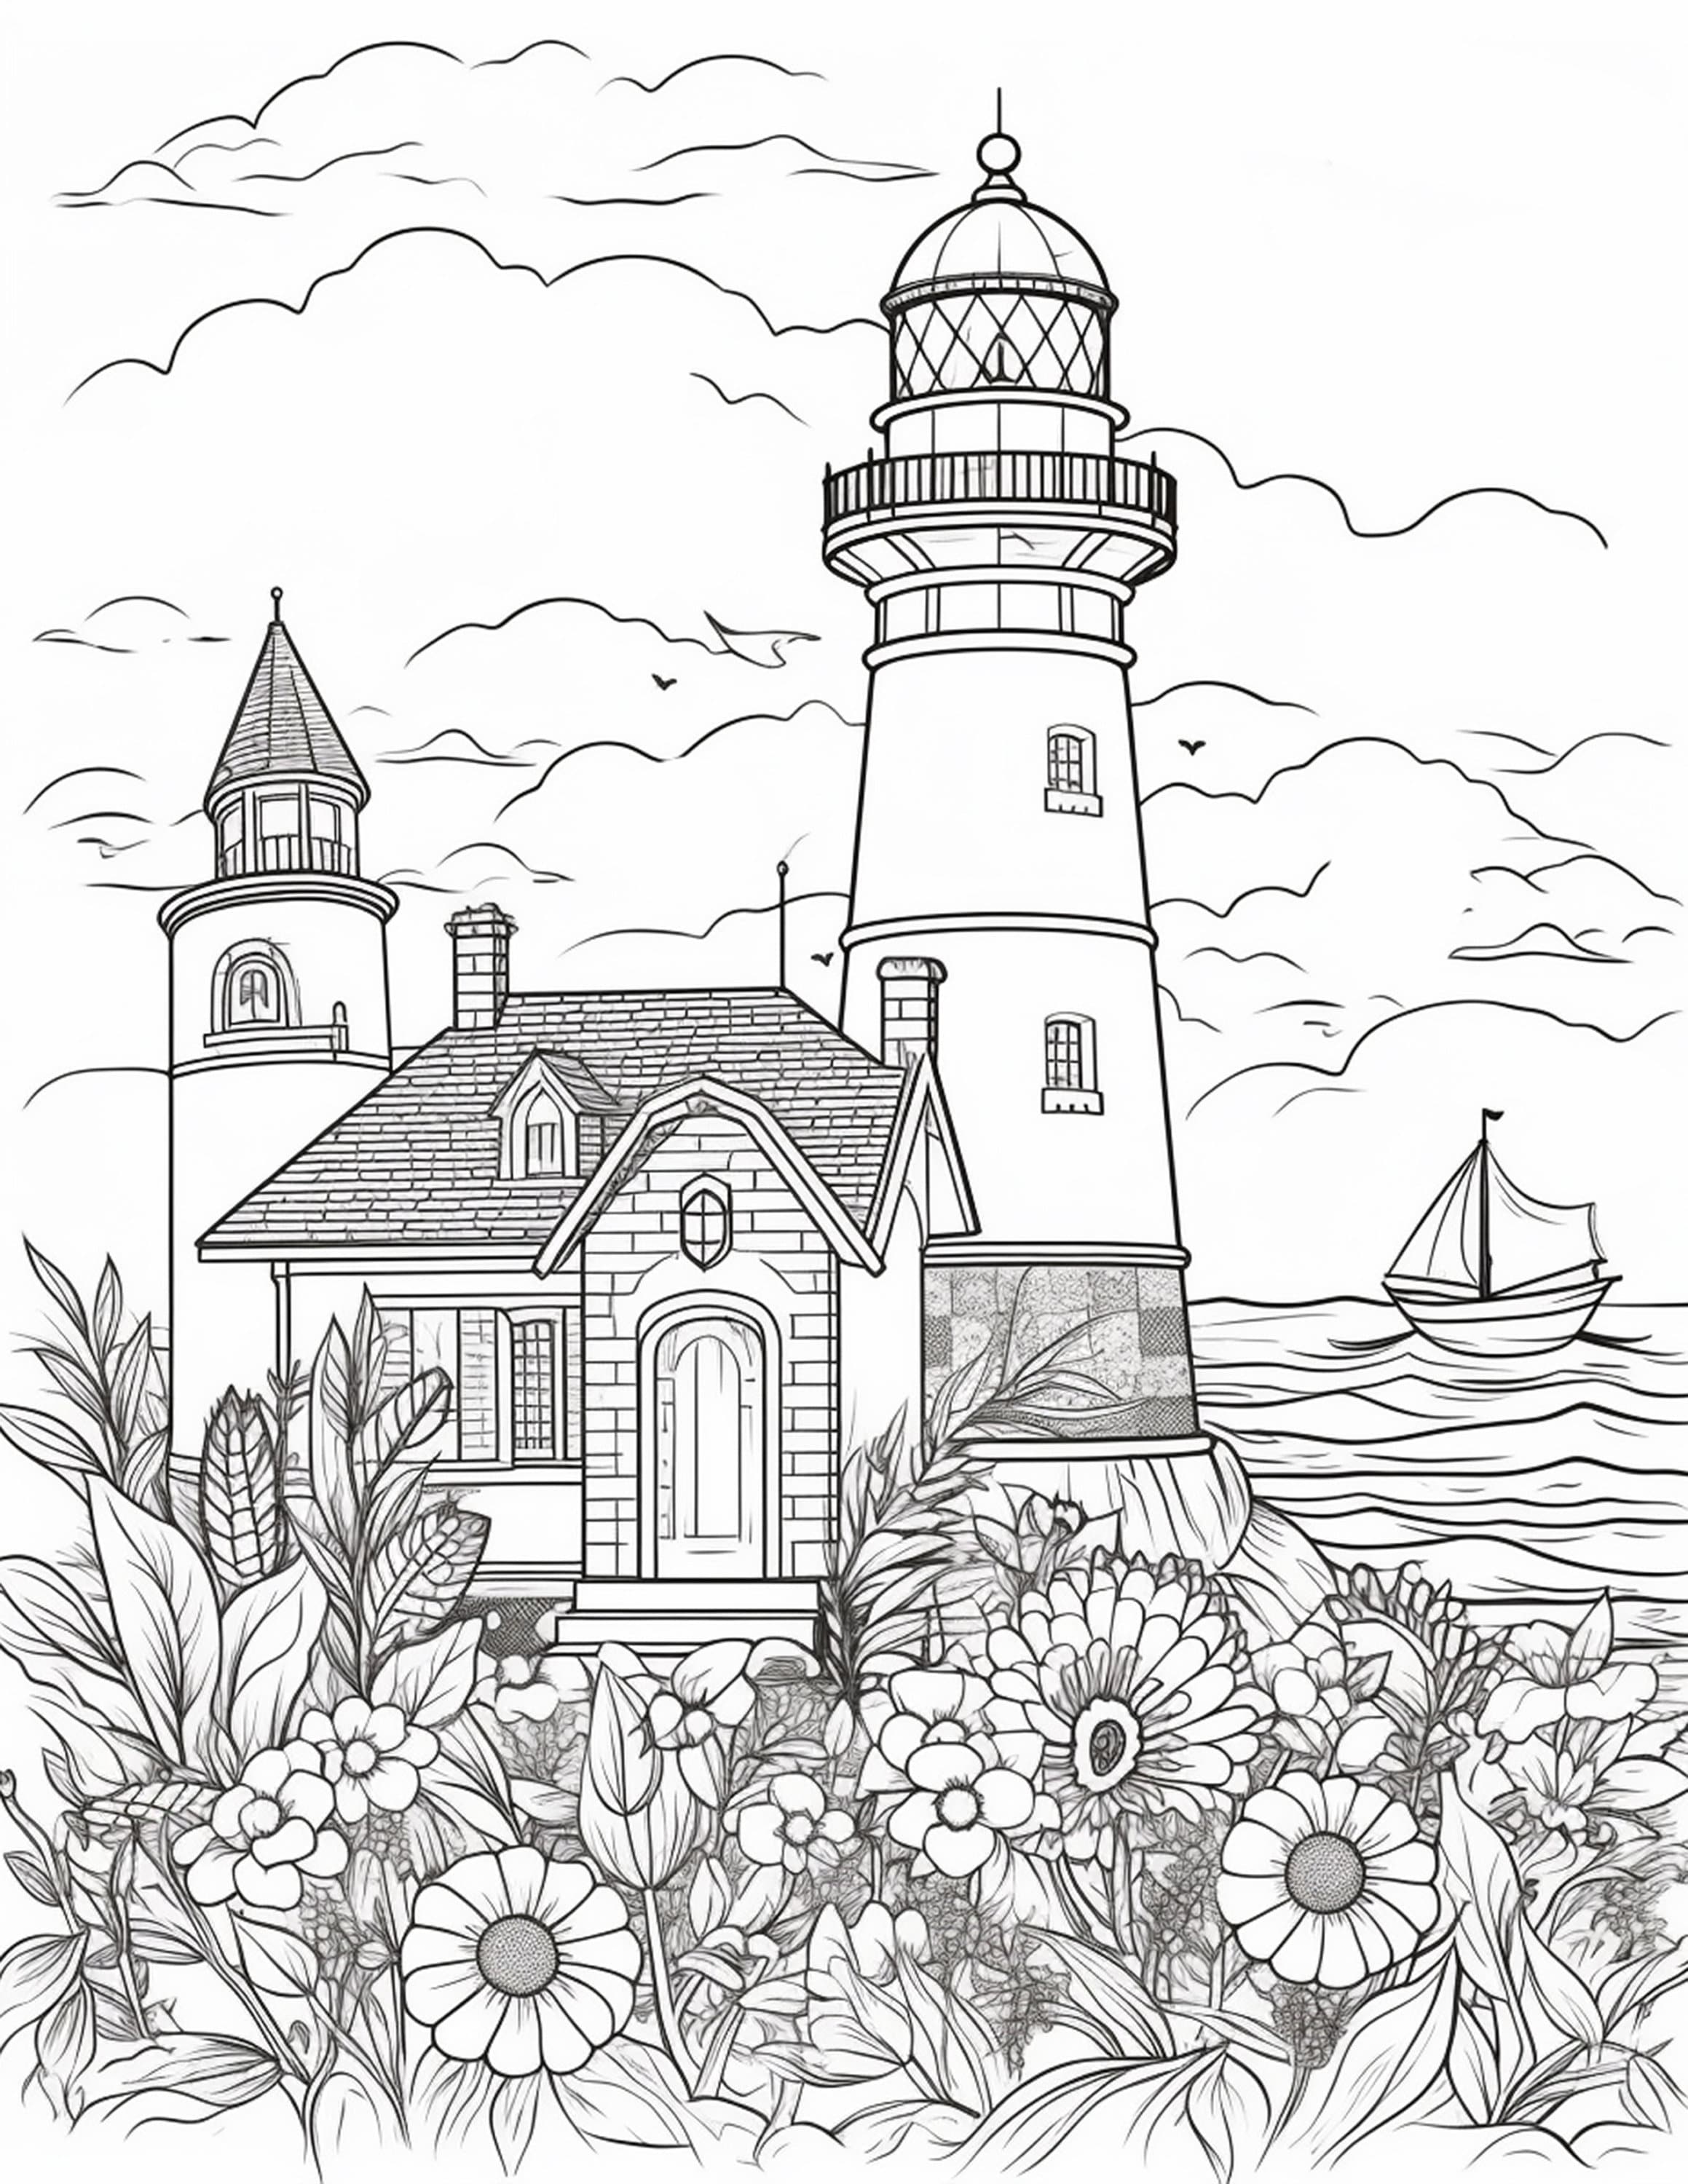  Lighthouses Coloring Book (8.5x8.5) - A Mystical Collection of  Lighthouses, Ships, Compasses, Sailboats, Seascapes, and more.: Mindful  Coloring Book,  Find Direction with this Coloring Book: 9798852467652:  Mazzeo, Seraphina: Books